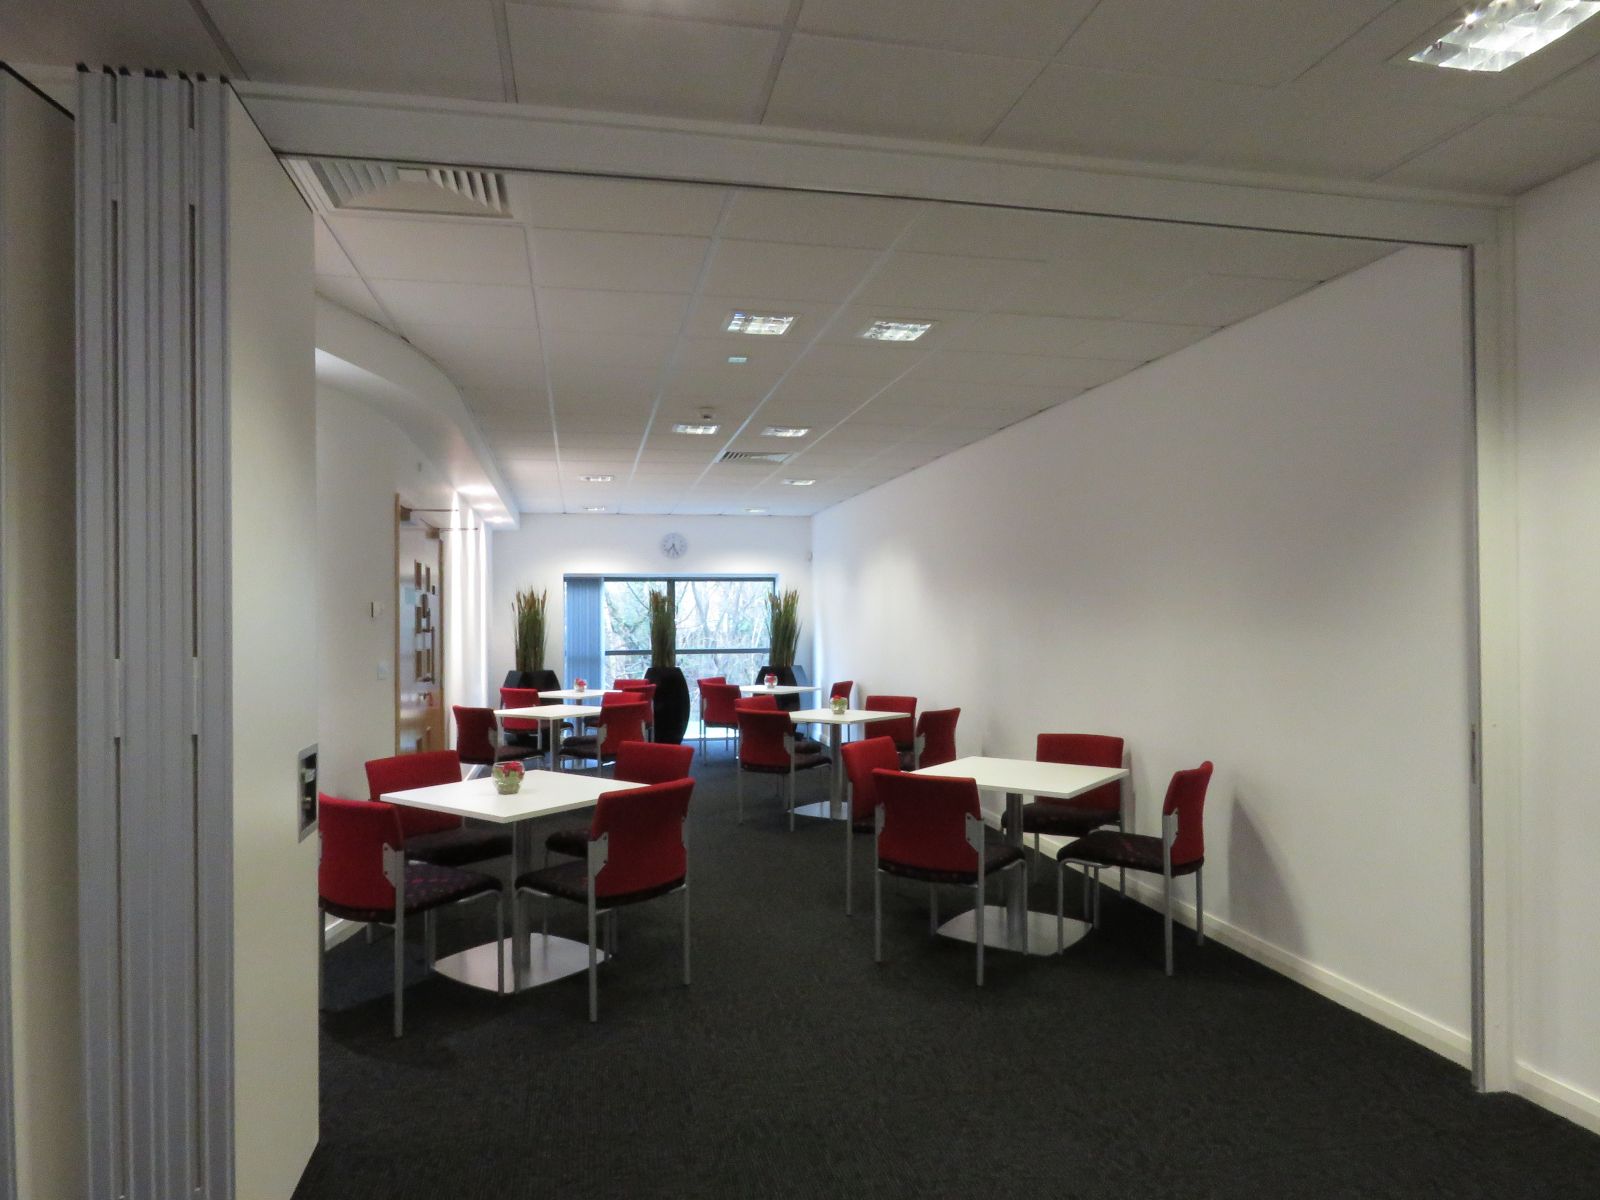 Networking / Dining Area